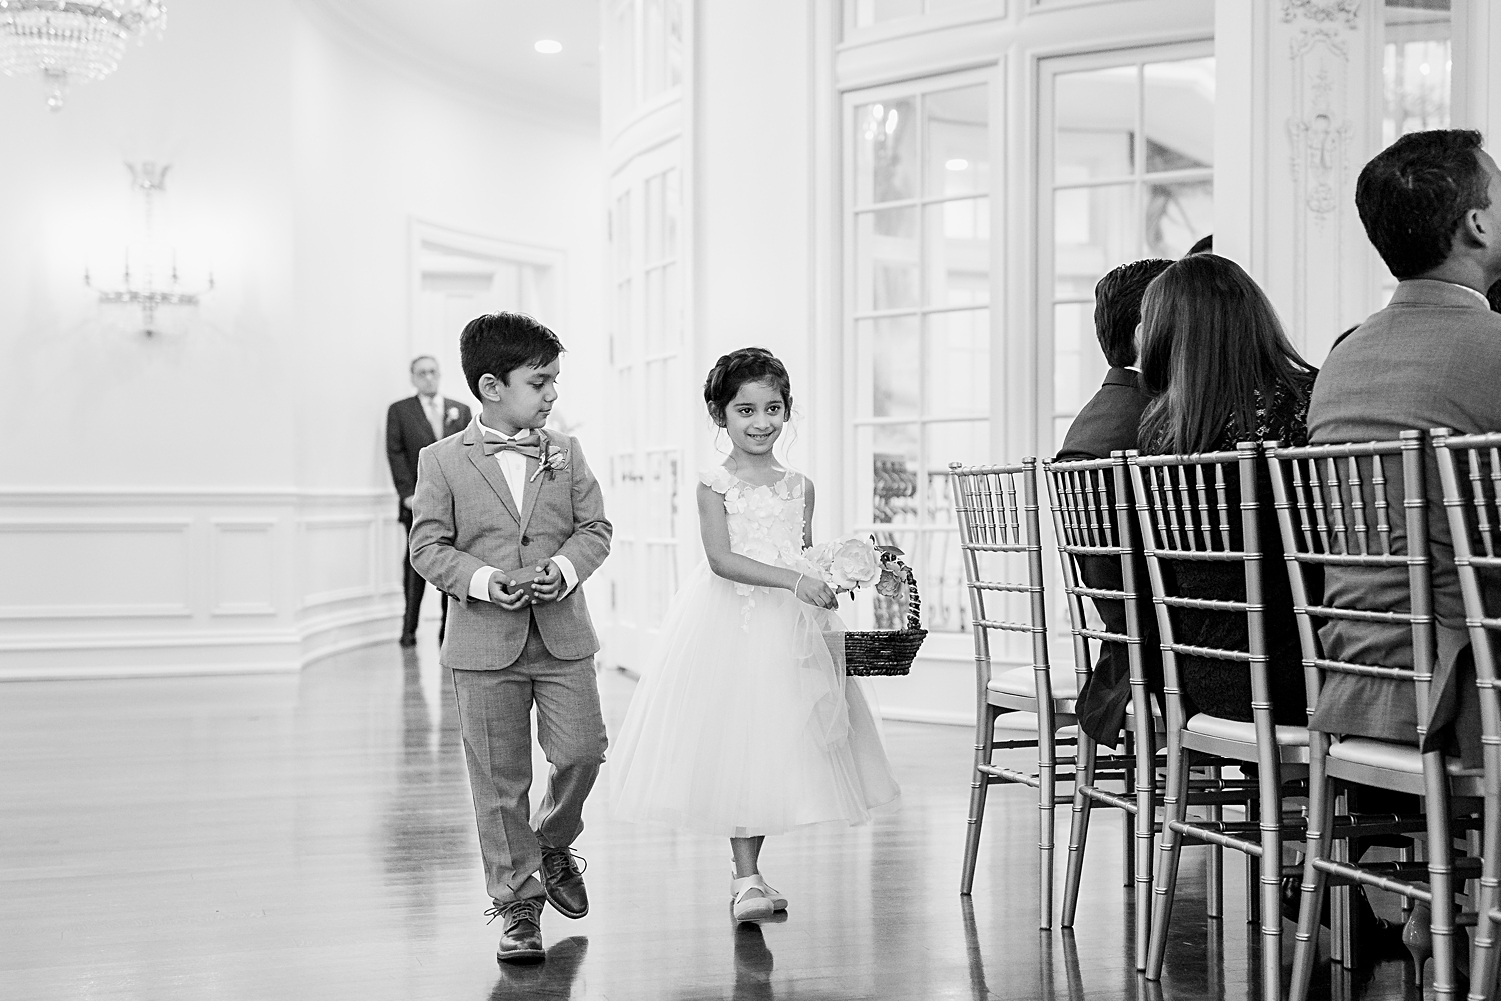 Indoor wedding ceremony flower girl and ring bearer walking down aisle smiling black and white